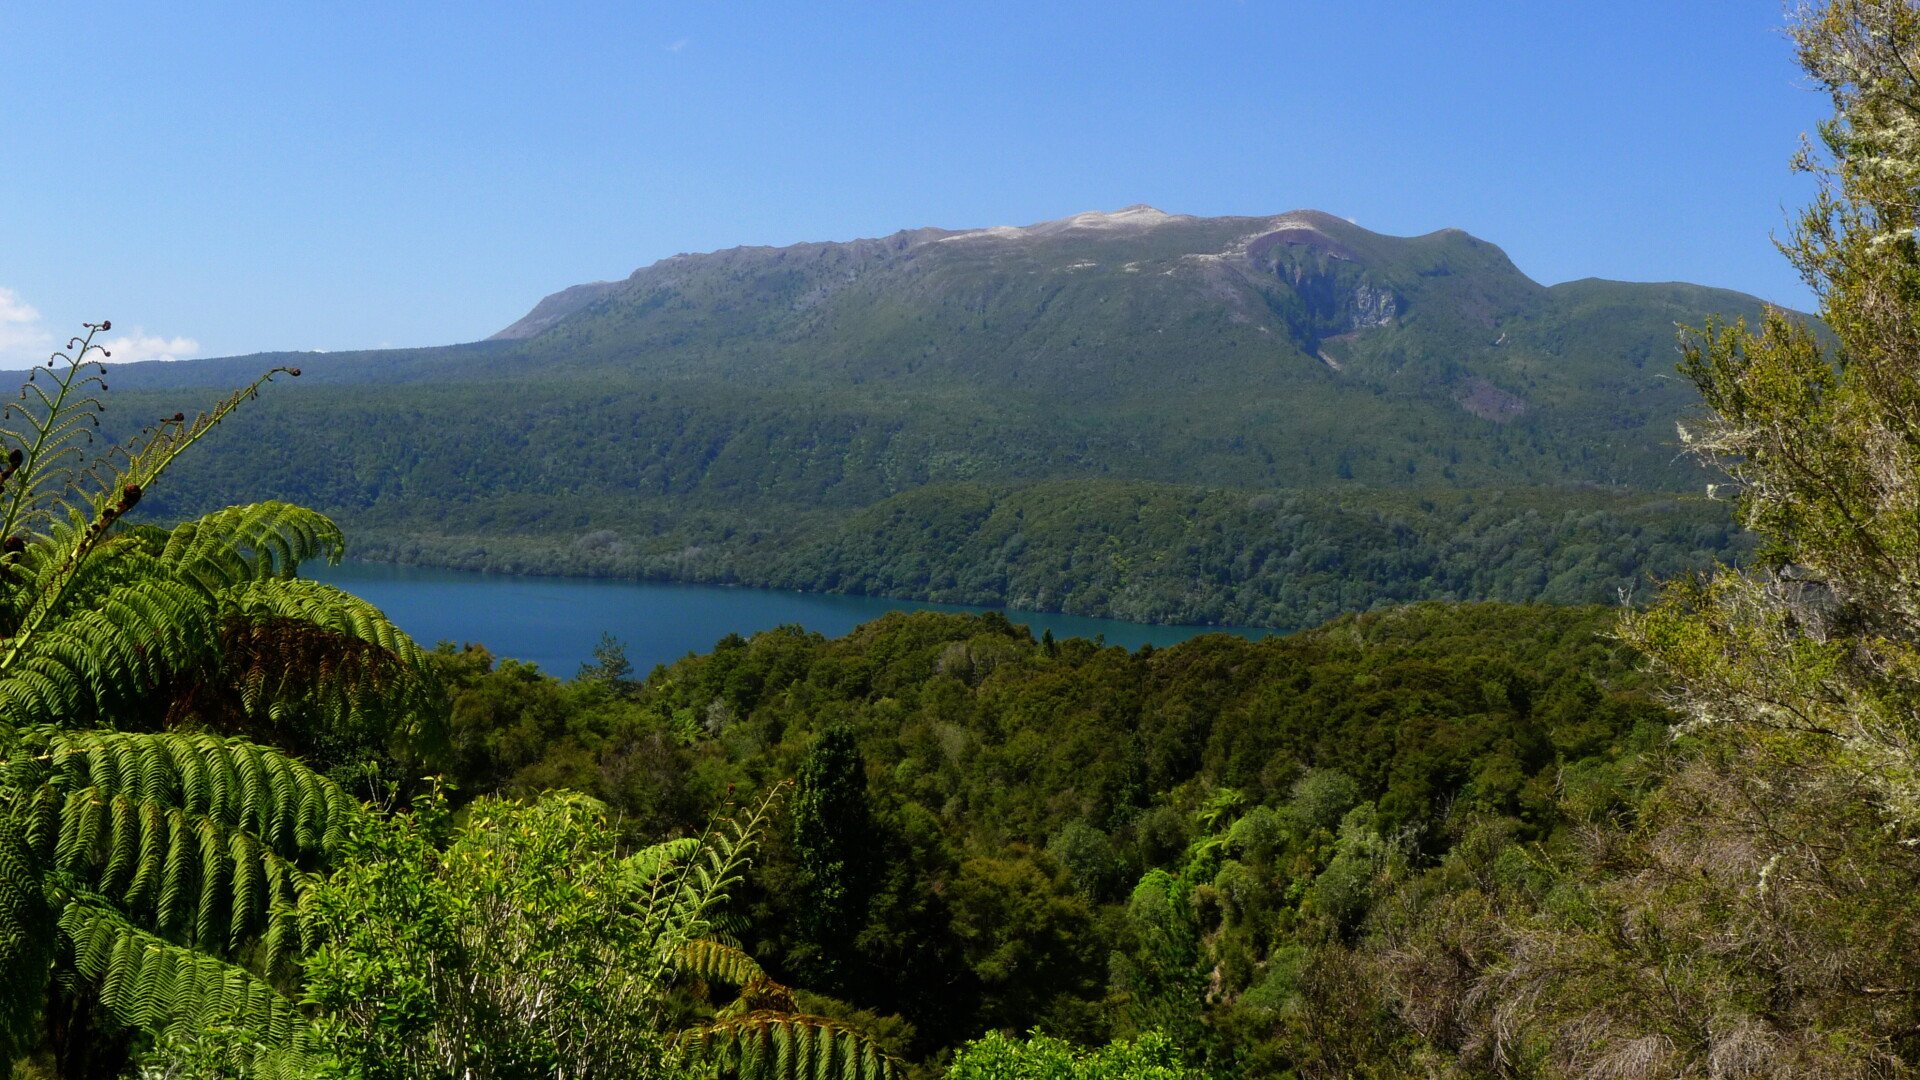 Mt Tarawera last erupted in 1886, the lake is warmed still from the thermal emissions